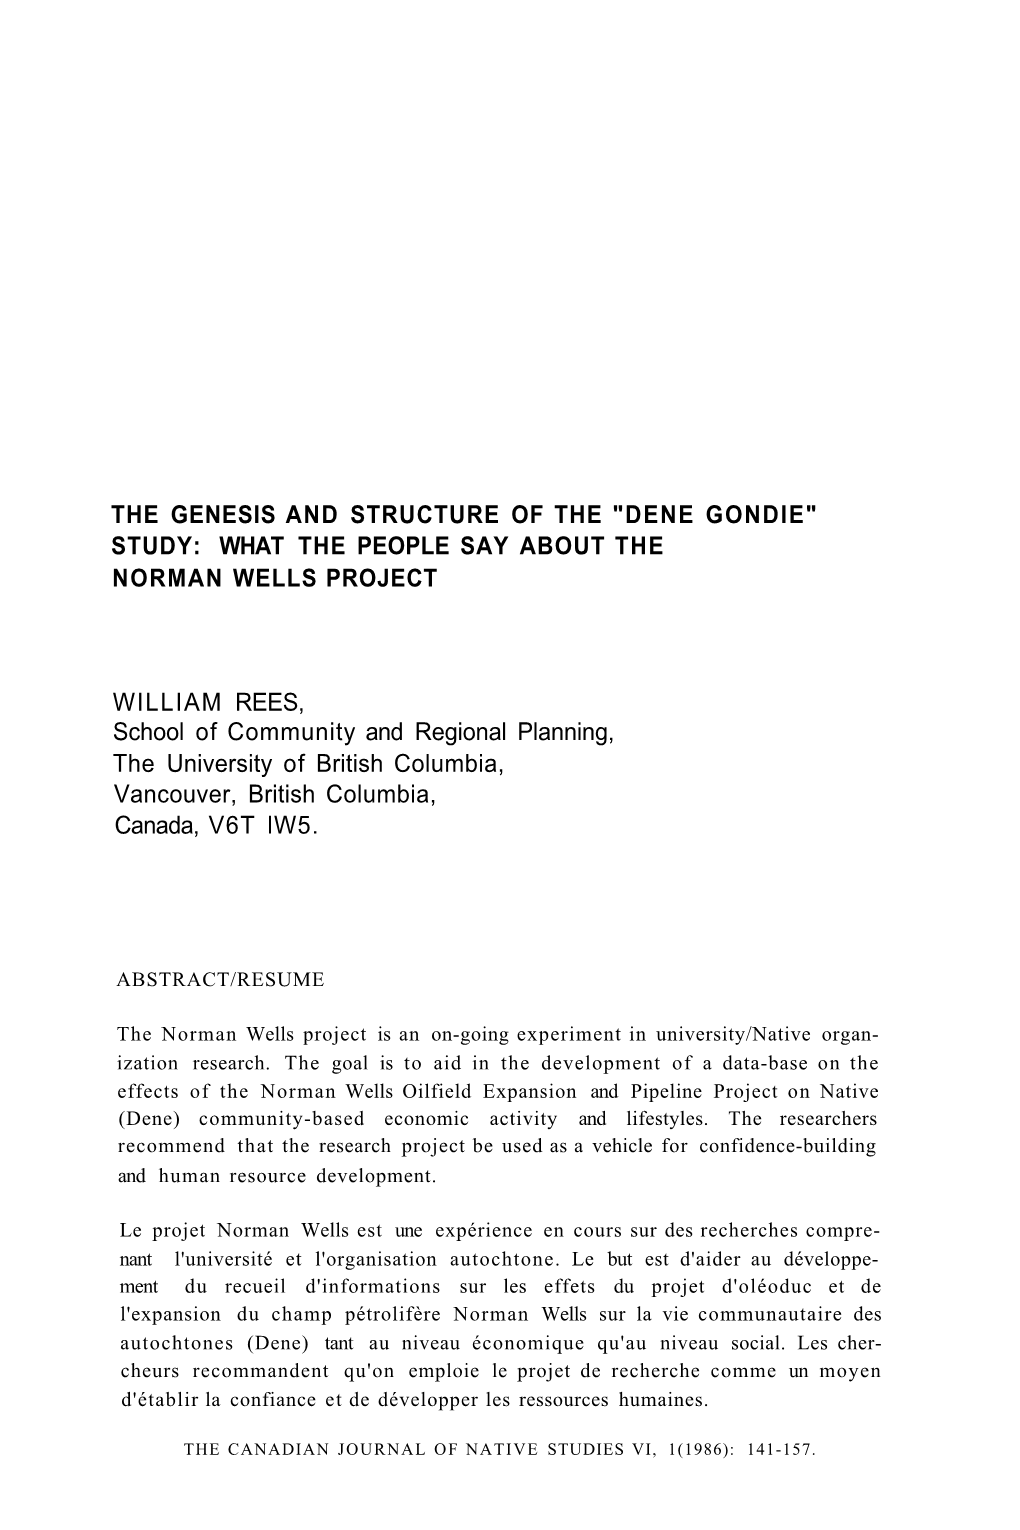 The Genesis and Structure of the "Dene Gondie" Study: What the People Say About the Norman Wells Project